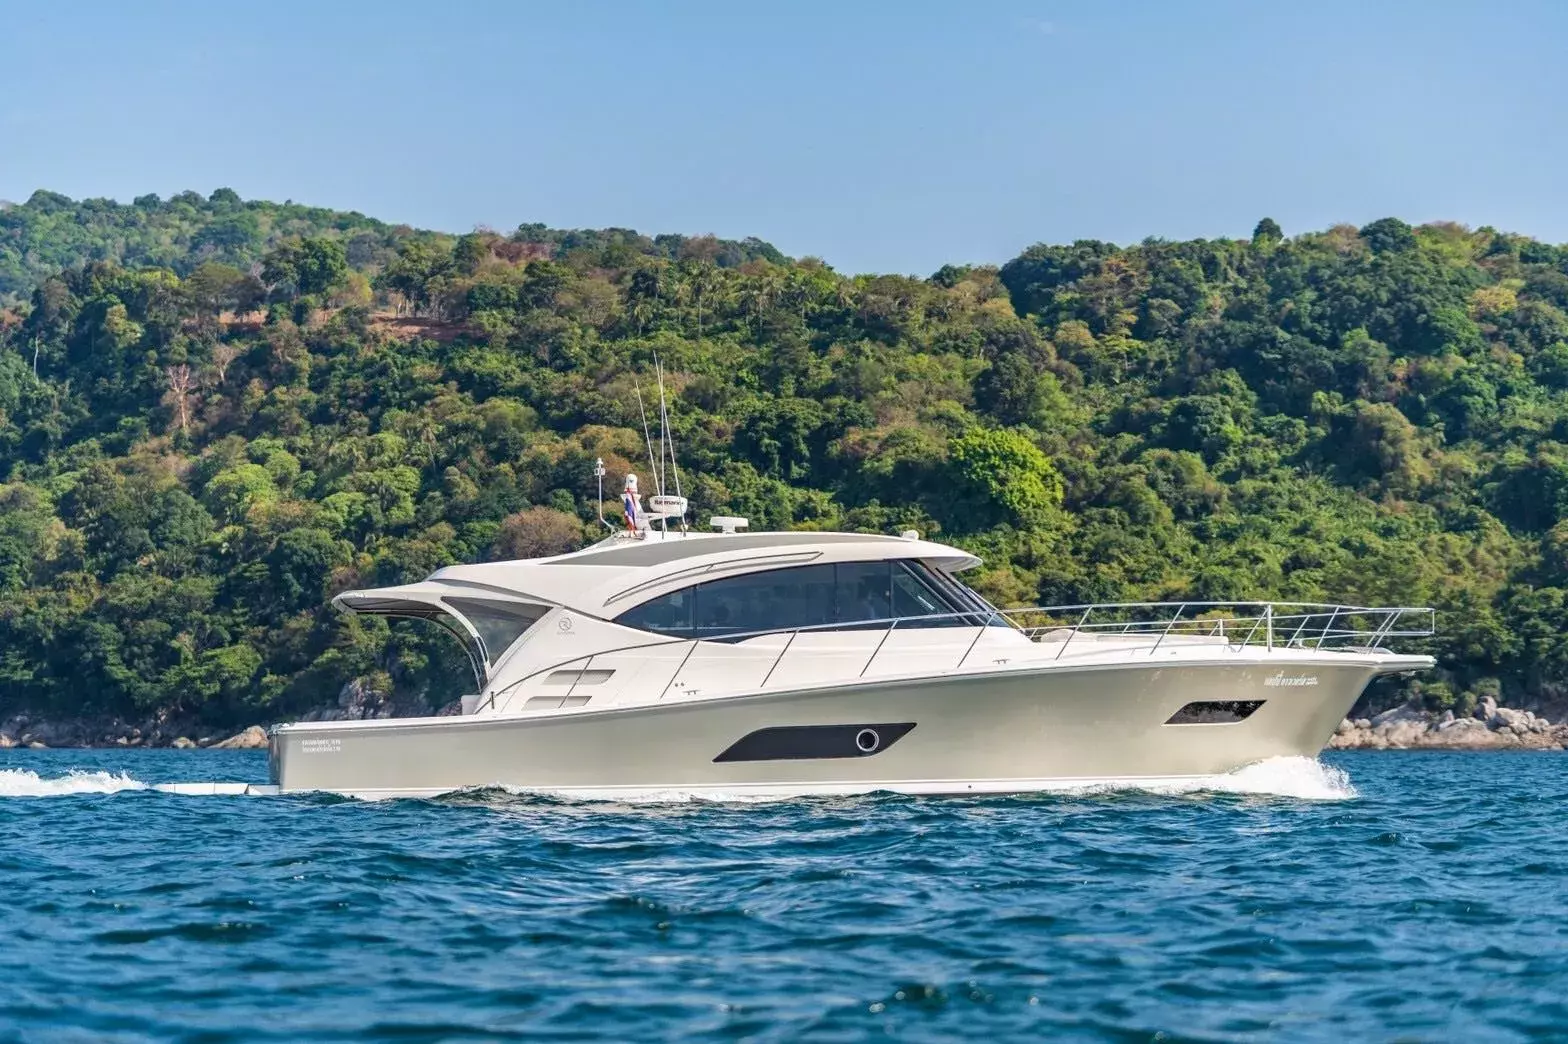 Happy Ours by Riviera - Top rates for a Rental of a private Motor Yacht in Thailand